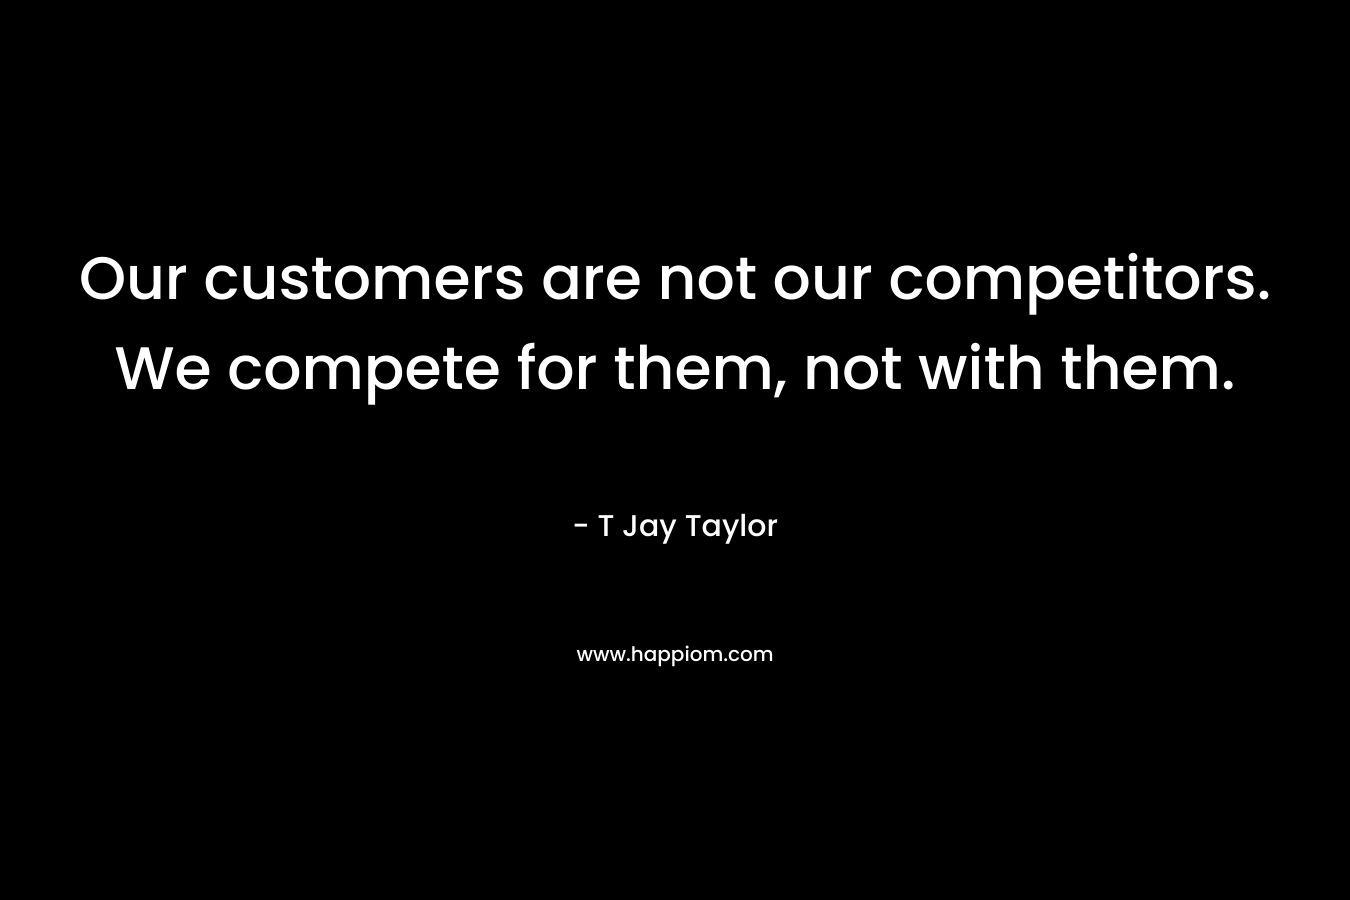 Our customers are not our competitors. We compete for them, not with them.